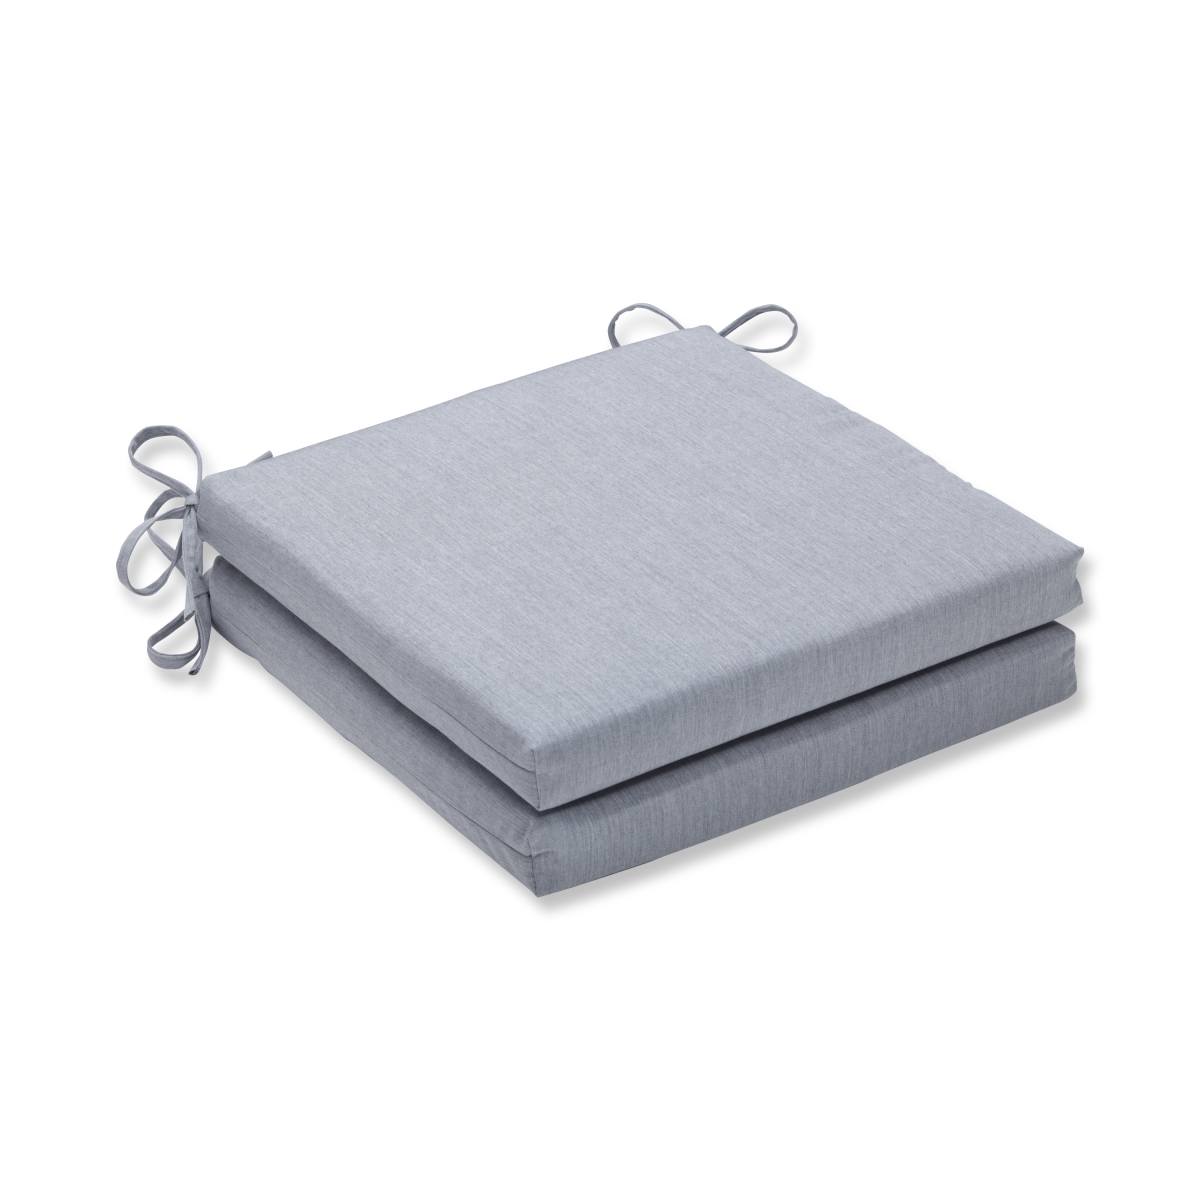 20 X 20 X 3 In. Outdoor & Indoor Canvas Granite Squared Corners Seat Cushion, Grey - Set Of 2